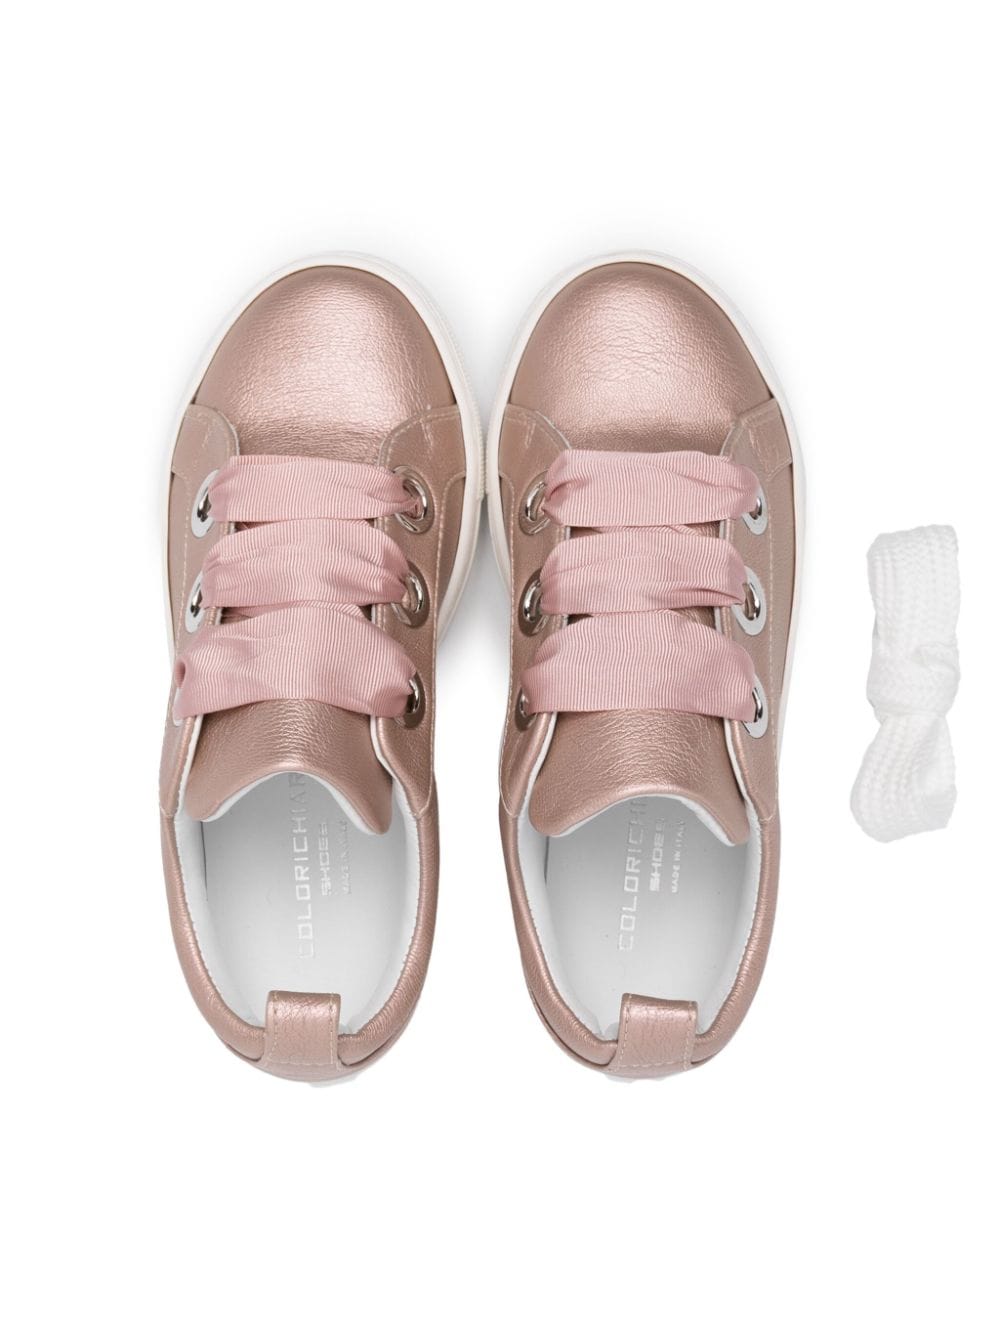 Shop Colorichiari Lace-up Leather Sneakers In Pink